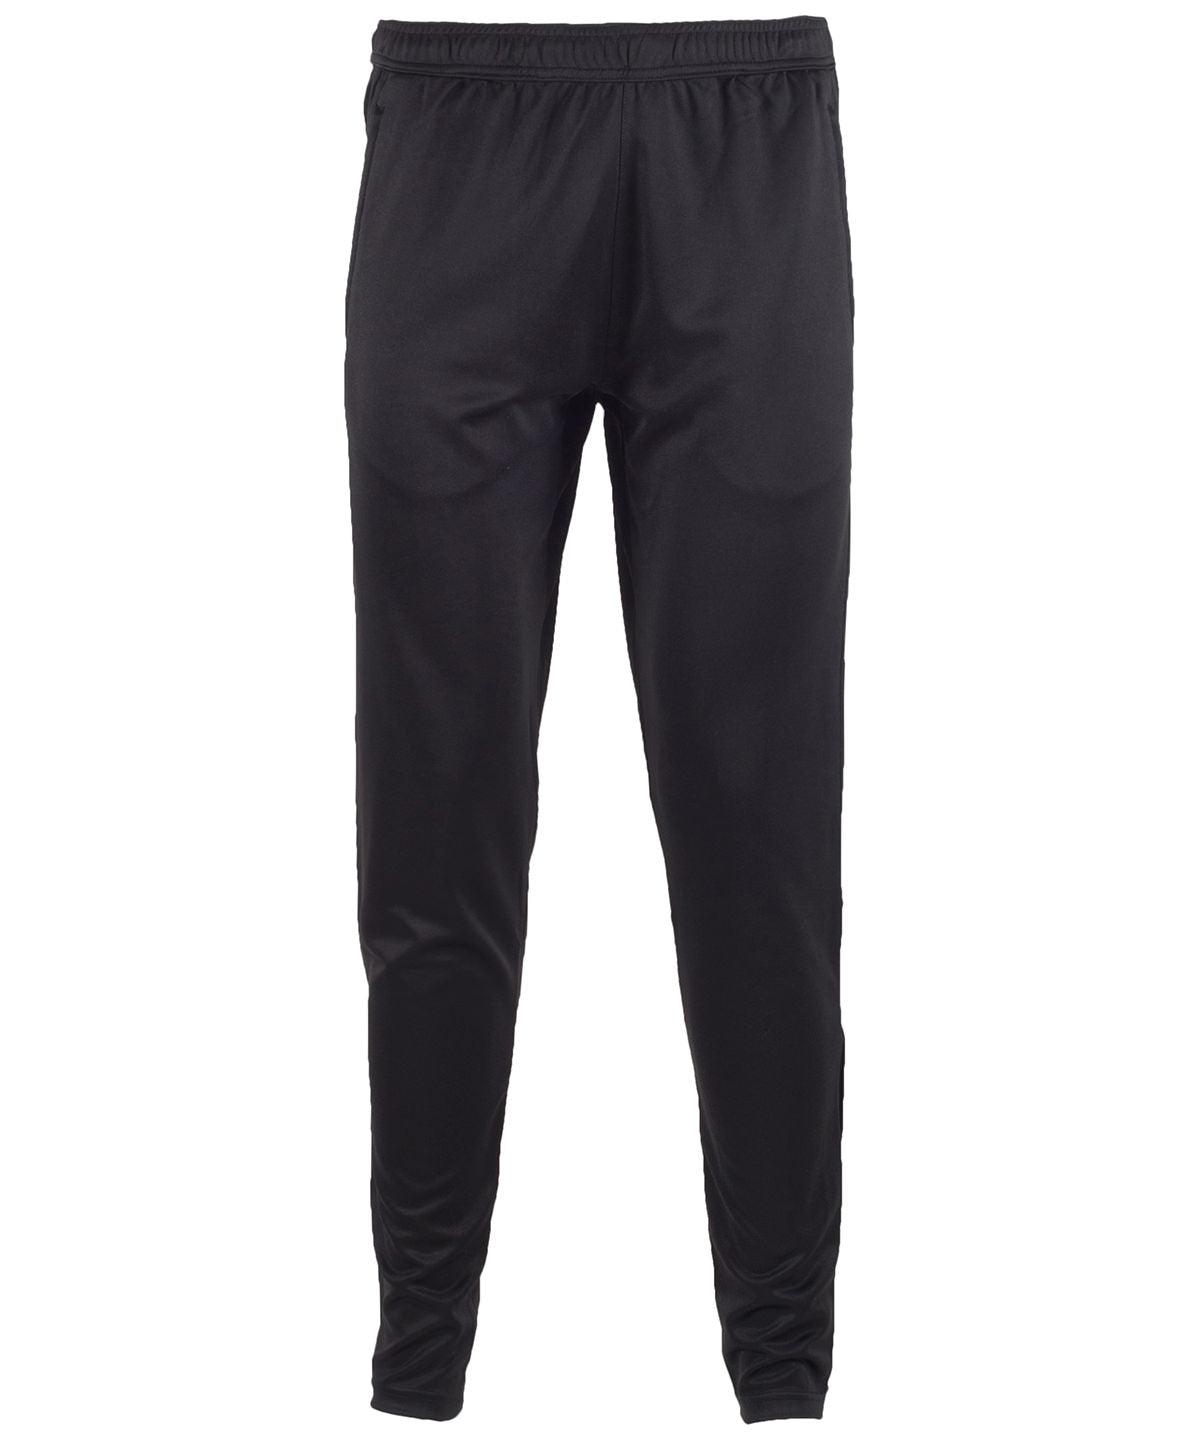 Black - Slim leg training pants Trousers Tombo Activewear & Performance, Athleisurewear, Must Haves, Sports & Leisure, Street Casual, Tracksuits, Trousers & Shorts Schoolwear Centres